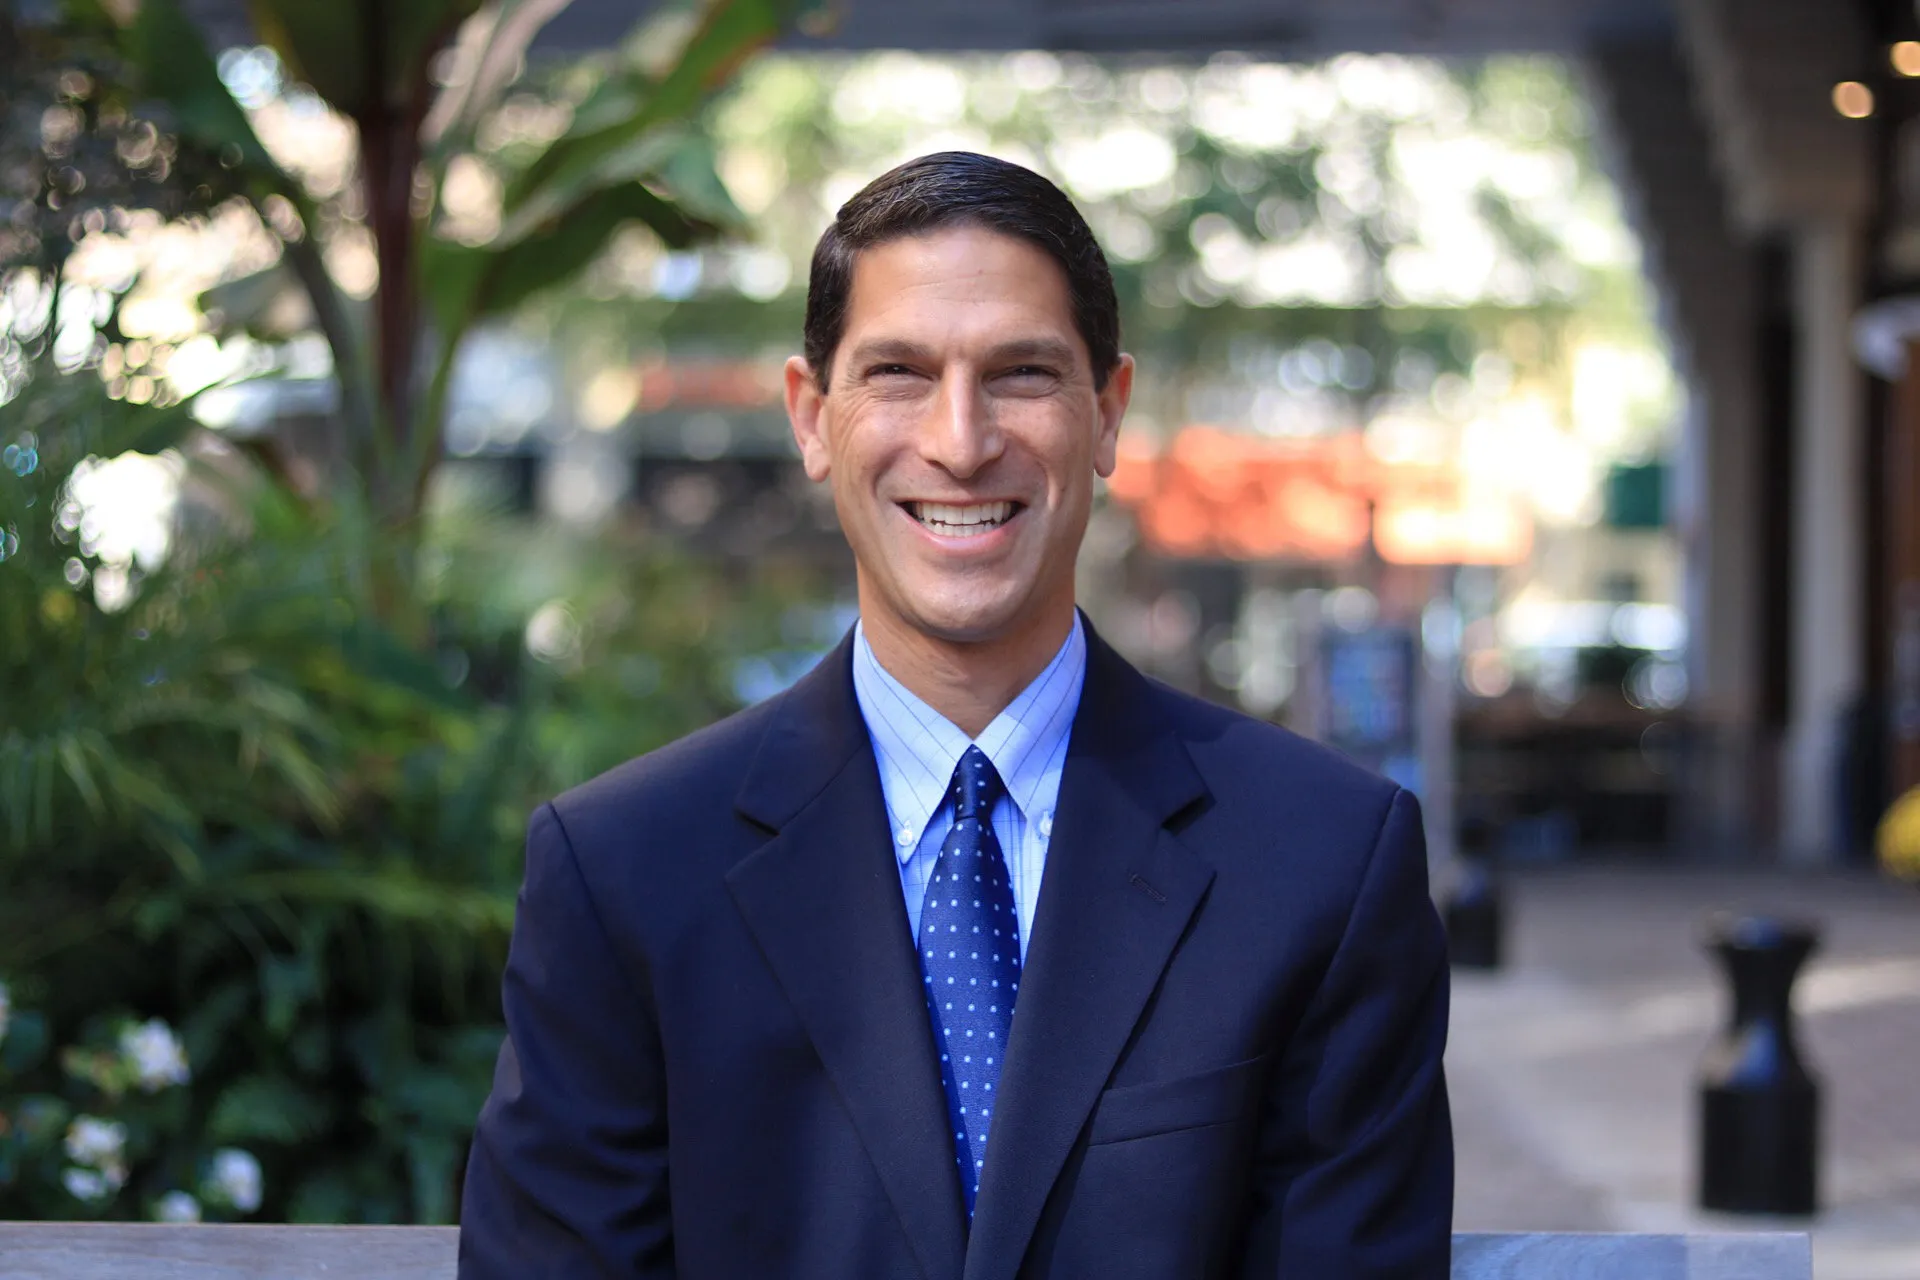 A photo portrait of Joel Eisenfeld, cropped to show his head and upper torso. He is smiling, has short, dark hair, and is wearing a dark suit and necktie. In the background, out-of-focus trees and shrubs are visible.